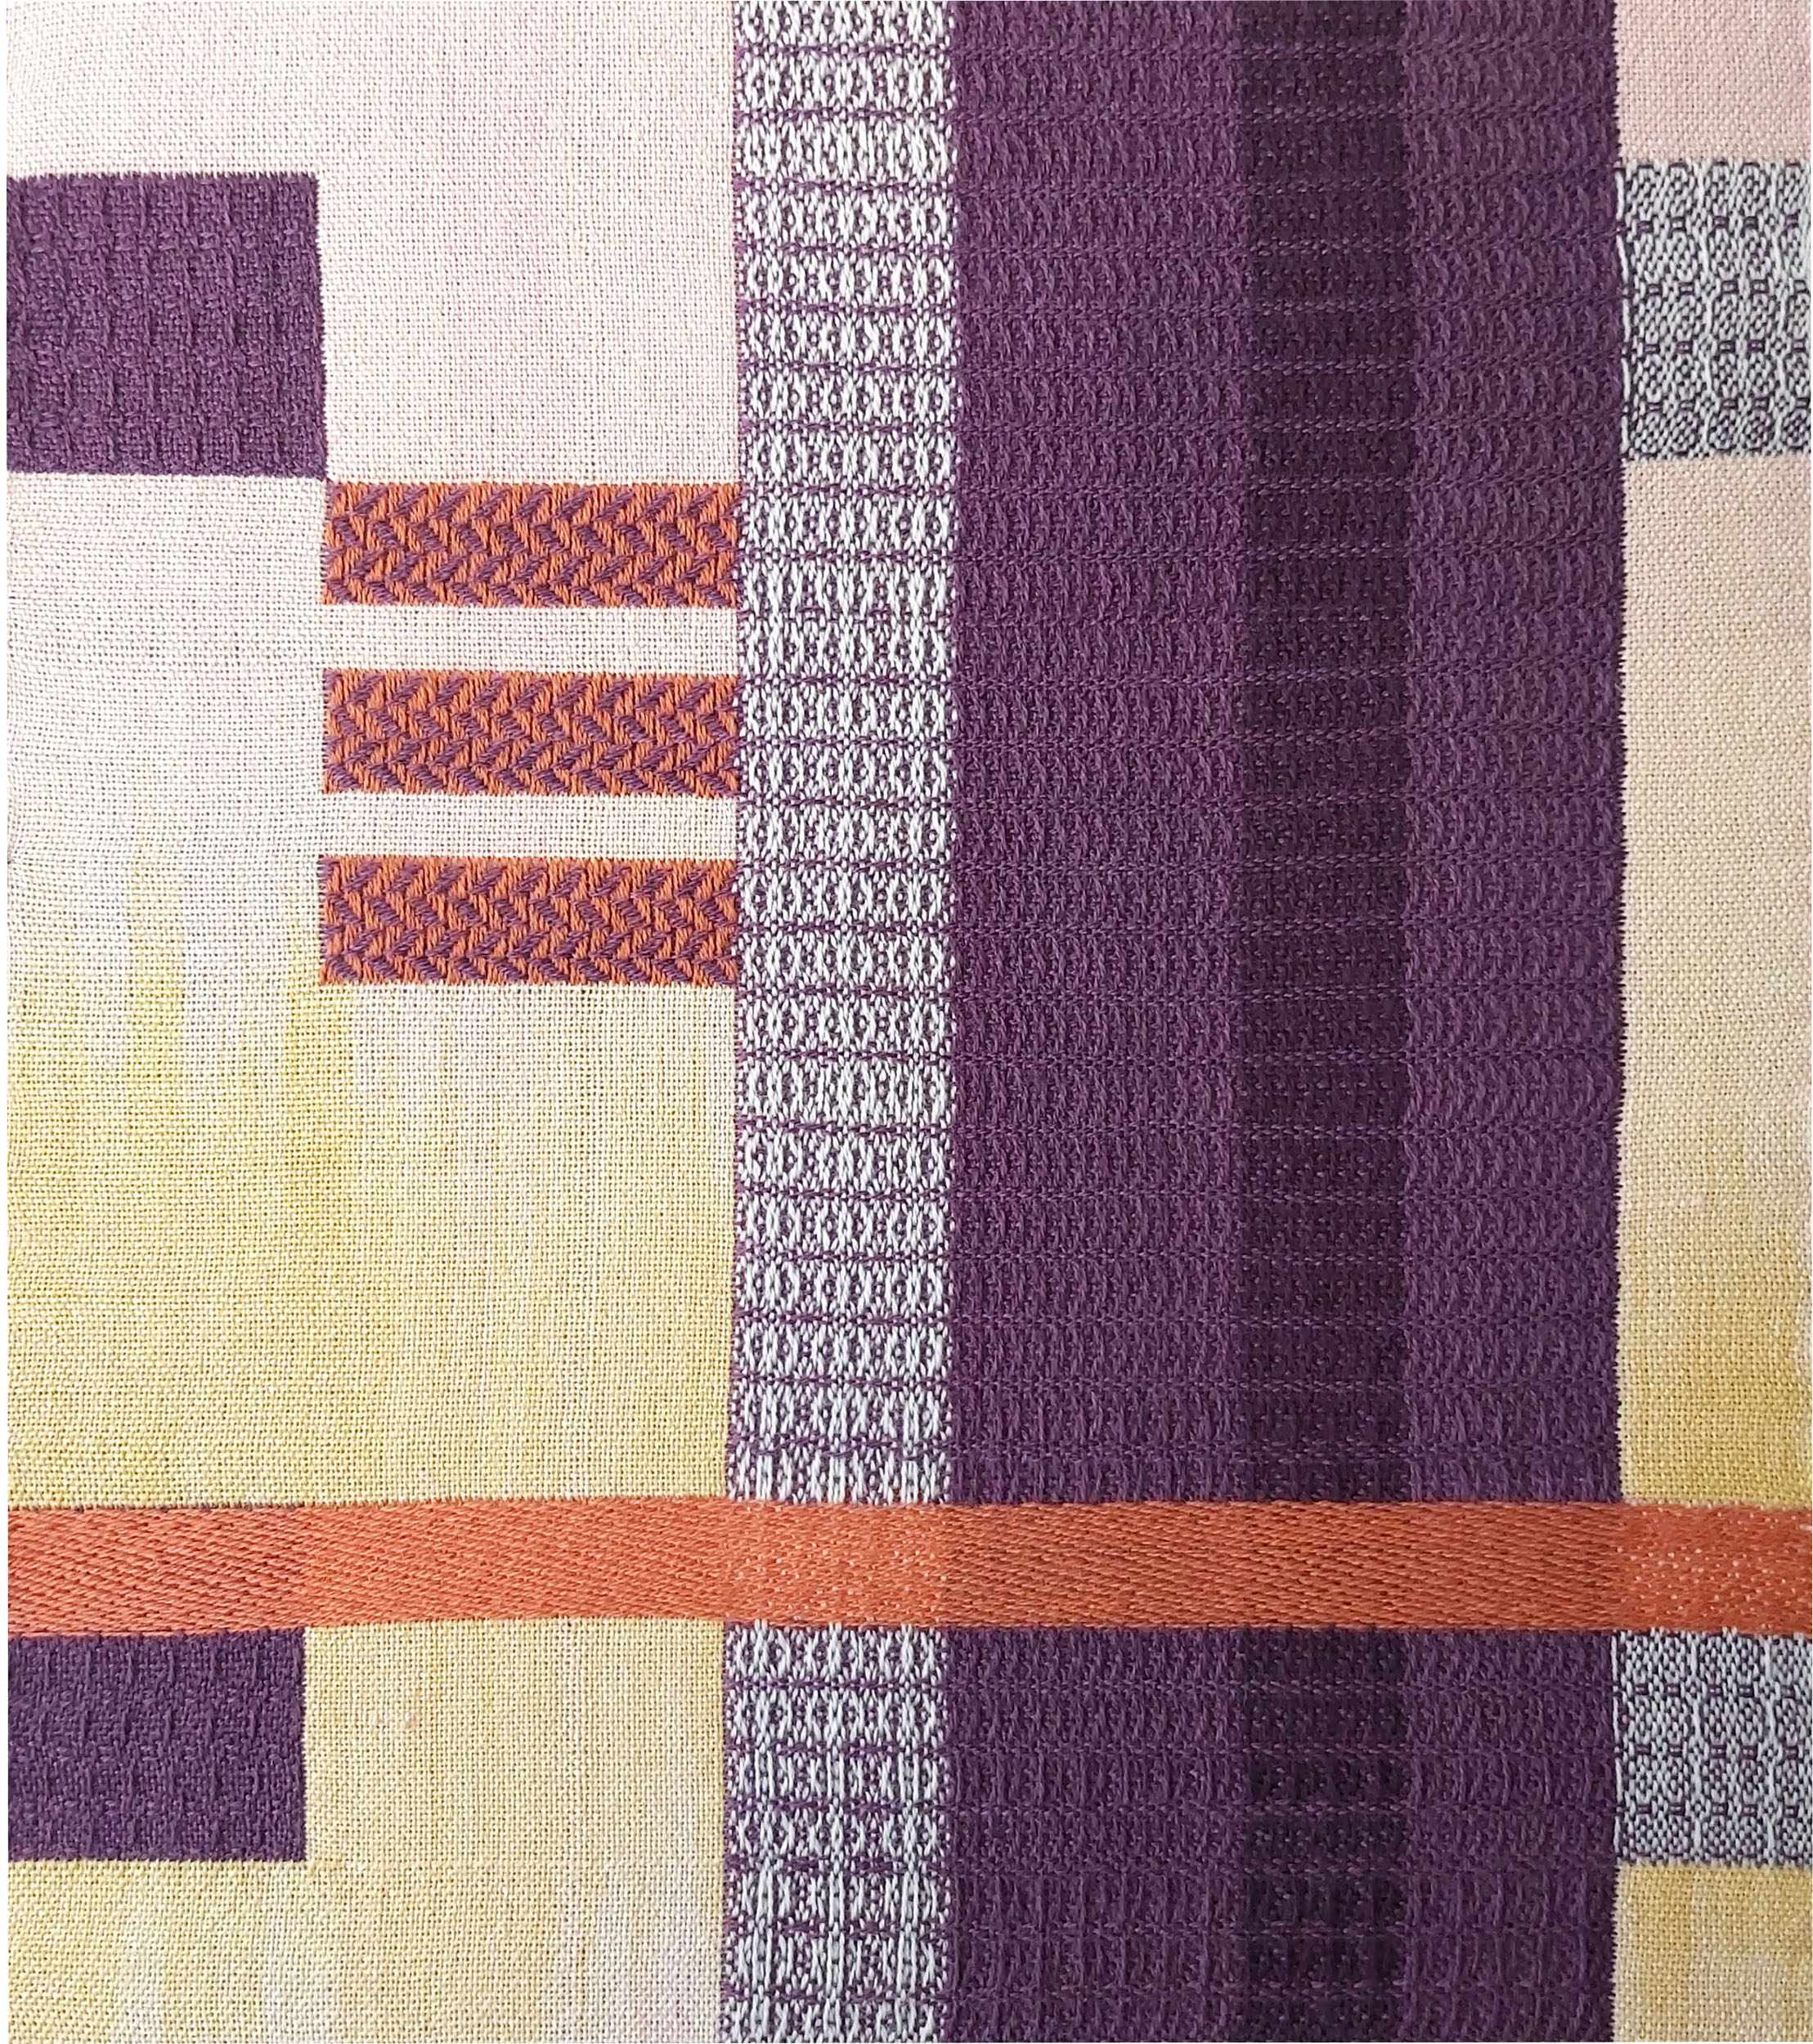 Woven panel in yellow, purple, and orange, inspired by the structure and form of buildings. Featuring soft colour change gradient.